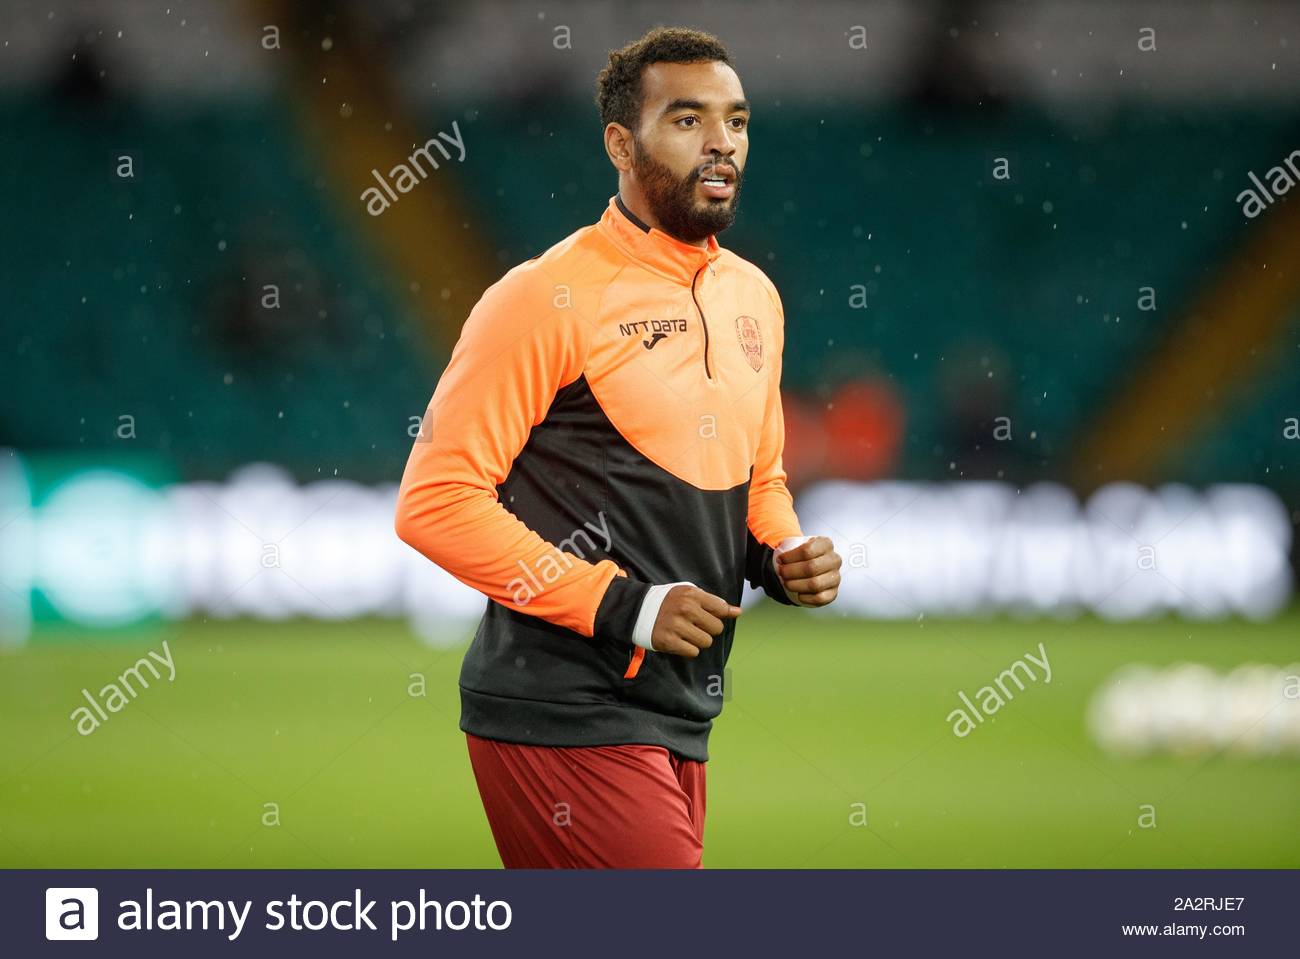 cfr clujs billel omrani warms up at celtic park before the uefa europa league group e match at celtic park glasgow 2A2RJE7 1